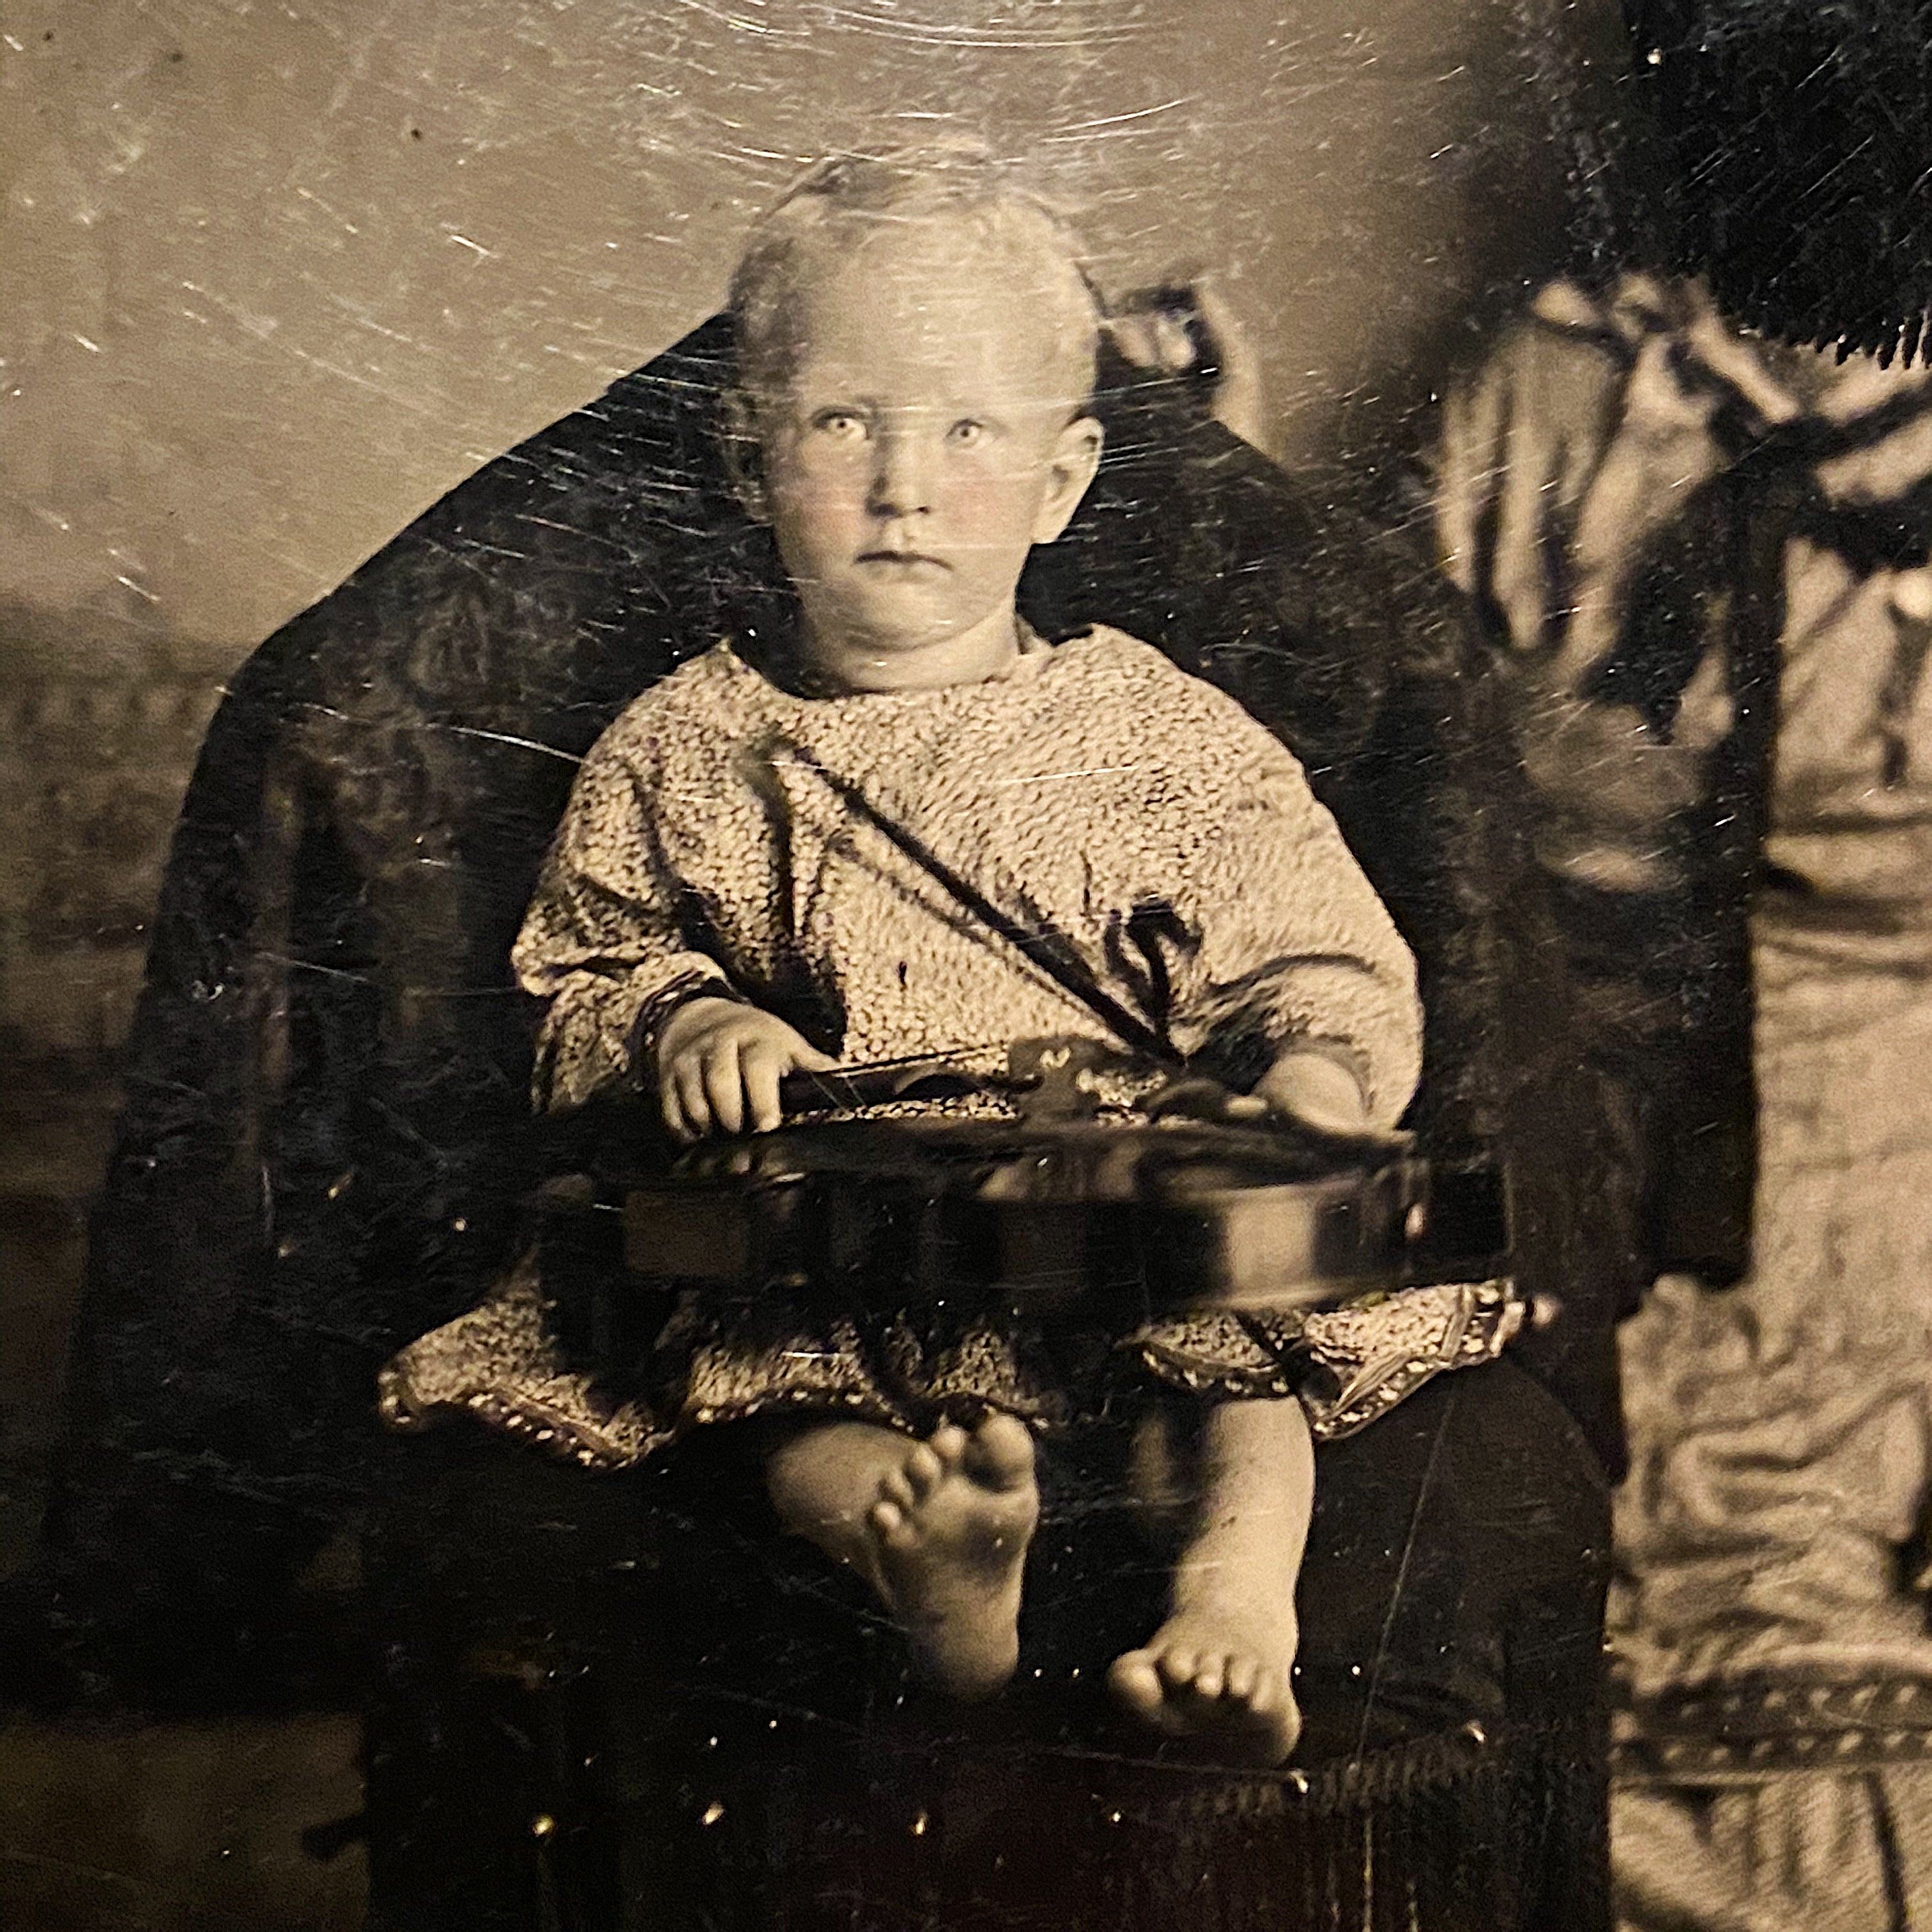 Antique Tintype of Child Holding a Violin - Early 1900s - Whimsical Scene - Unusual Photography - Rare Musical Photo